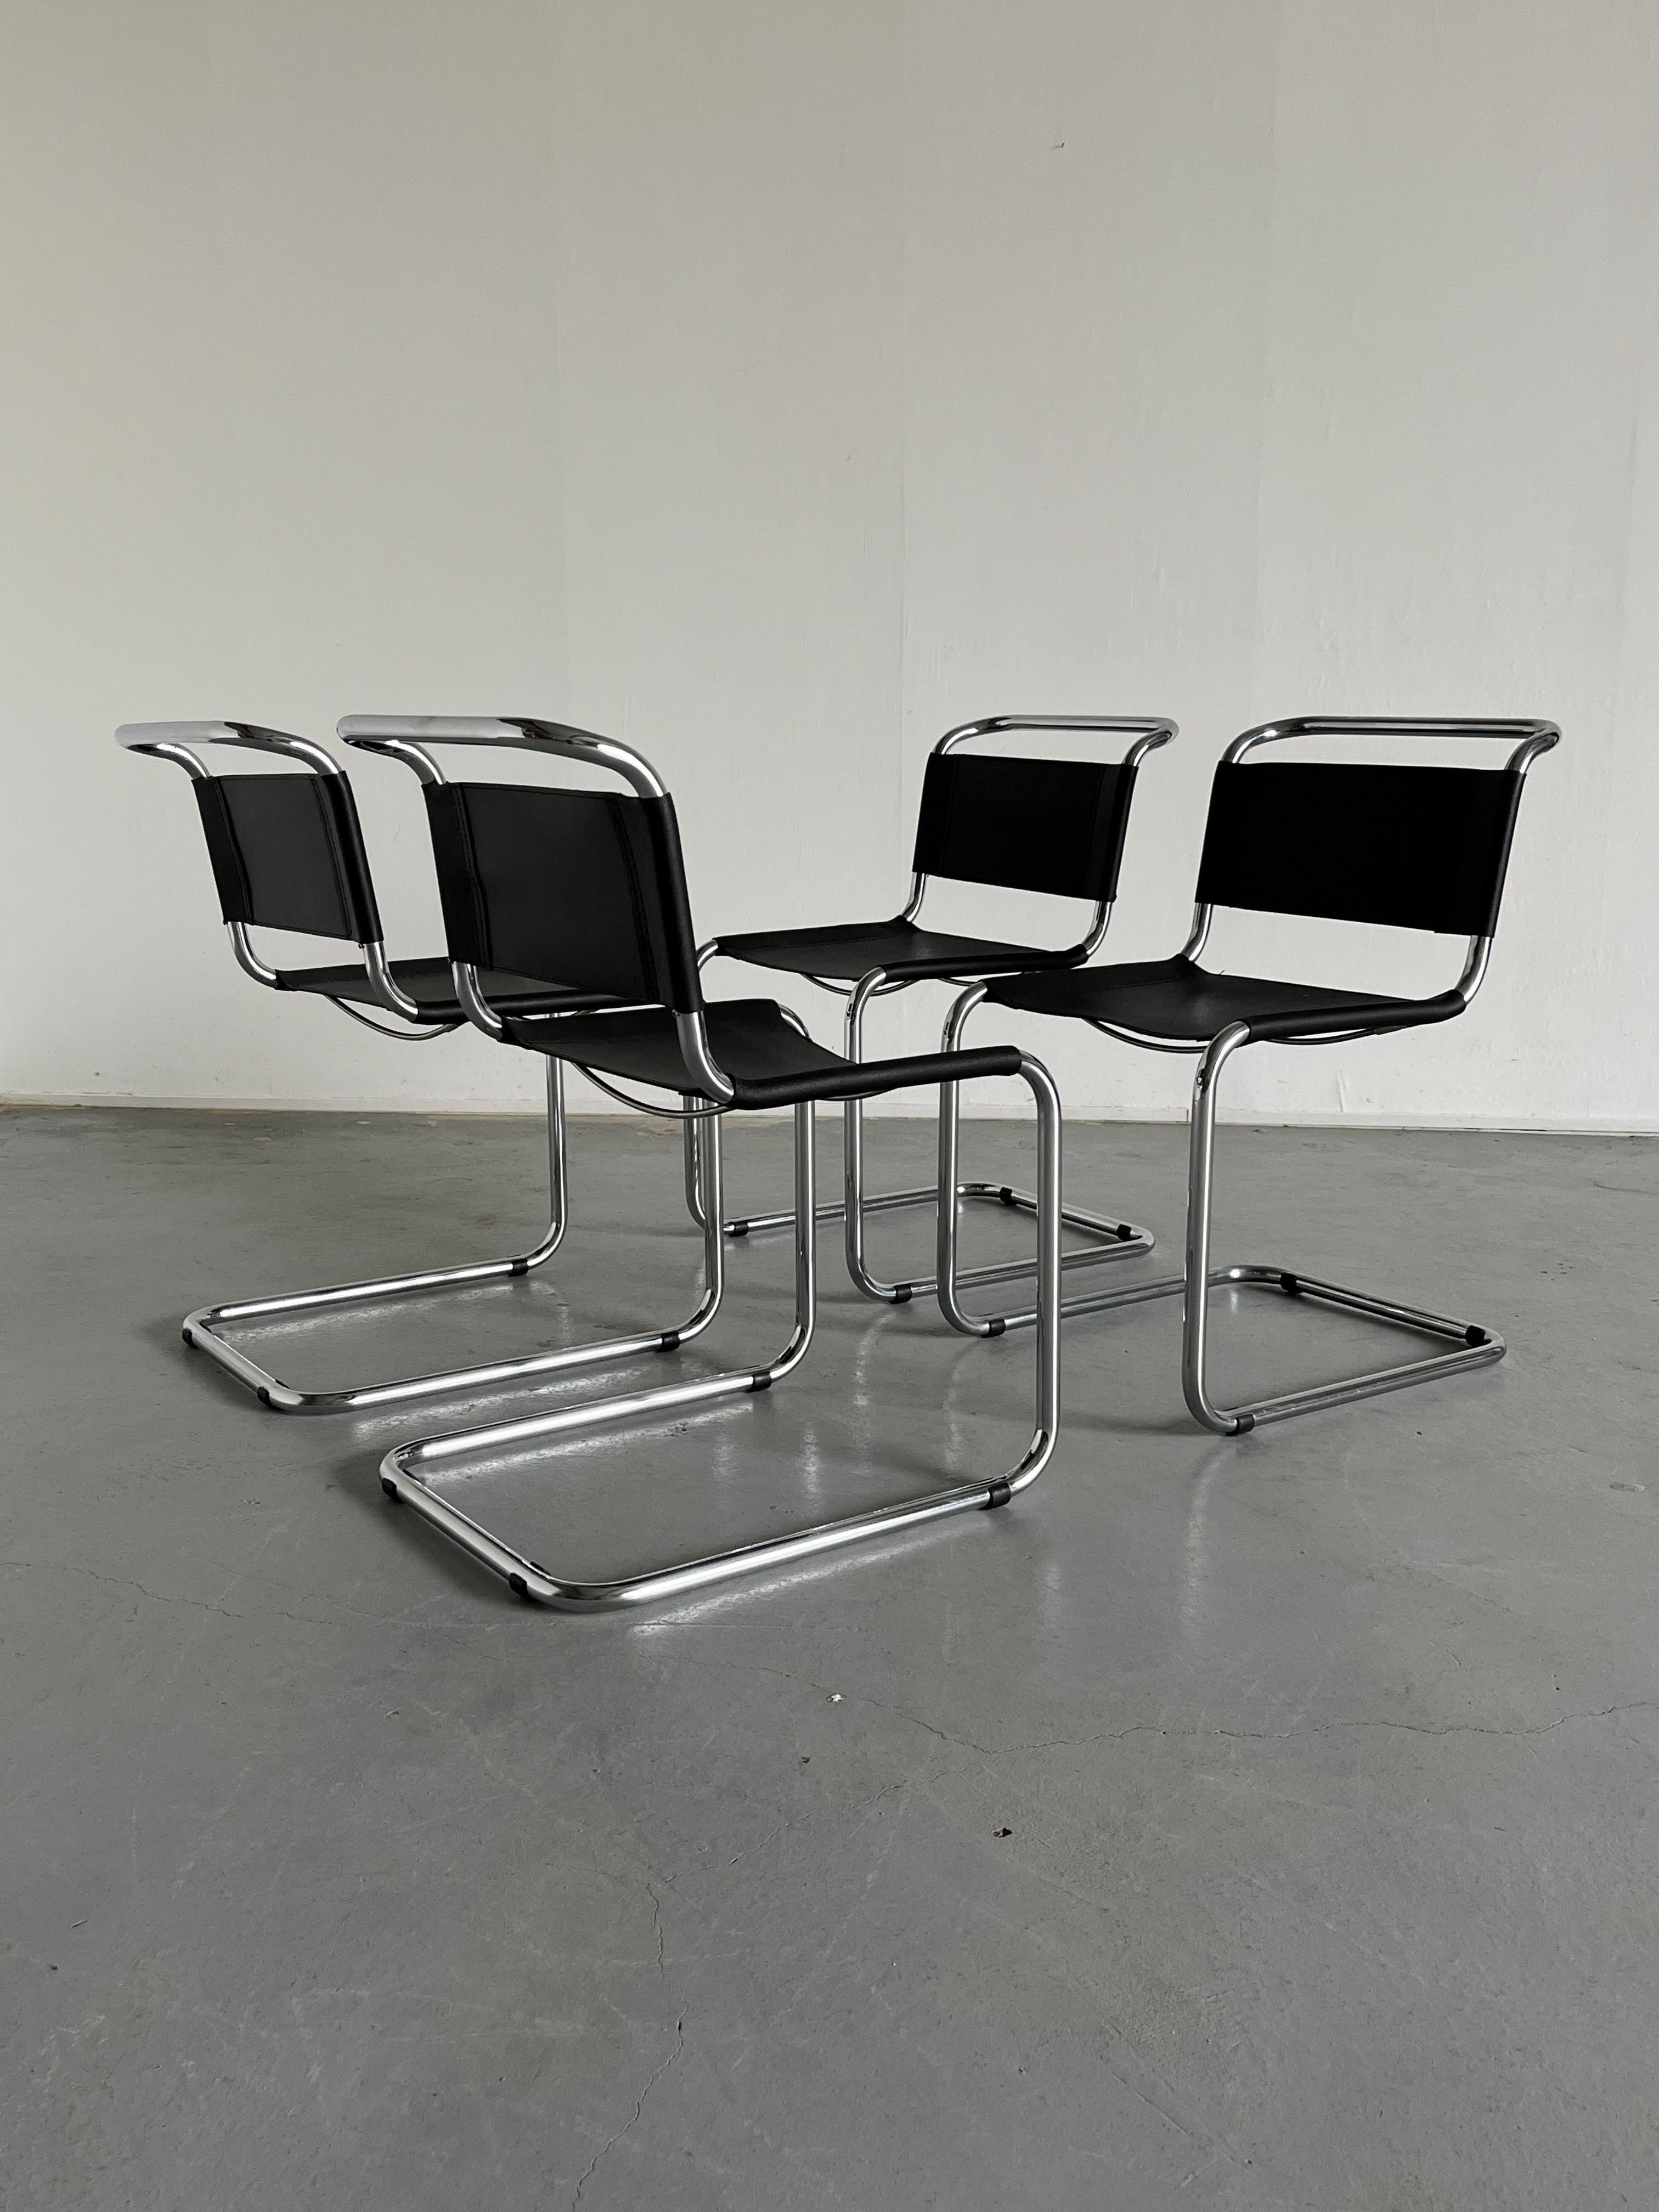 Mart Stam S33 Design Cantilever Tubular Steel and Faux Leather Chairs, 1970s For Sale 2